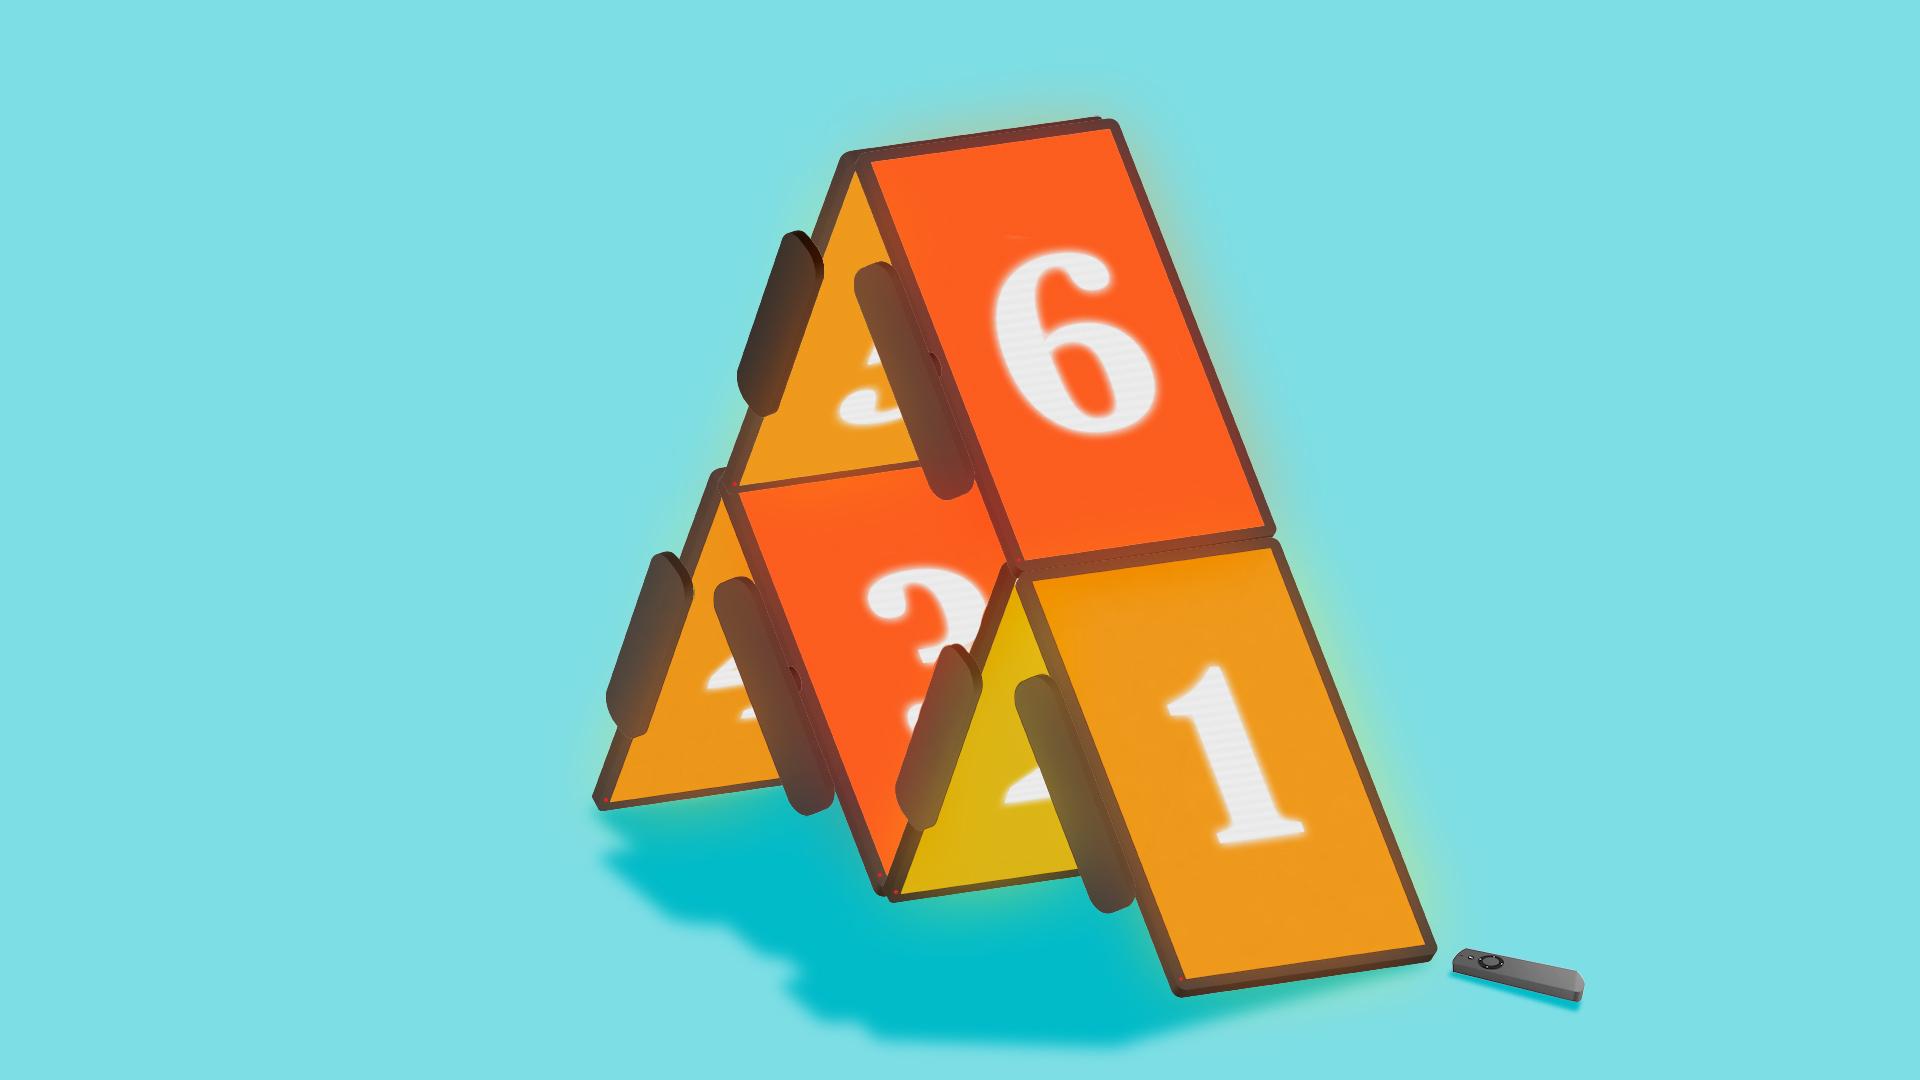 Illustration of orange cards stacked in a pyramid with white numbers on them